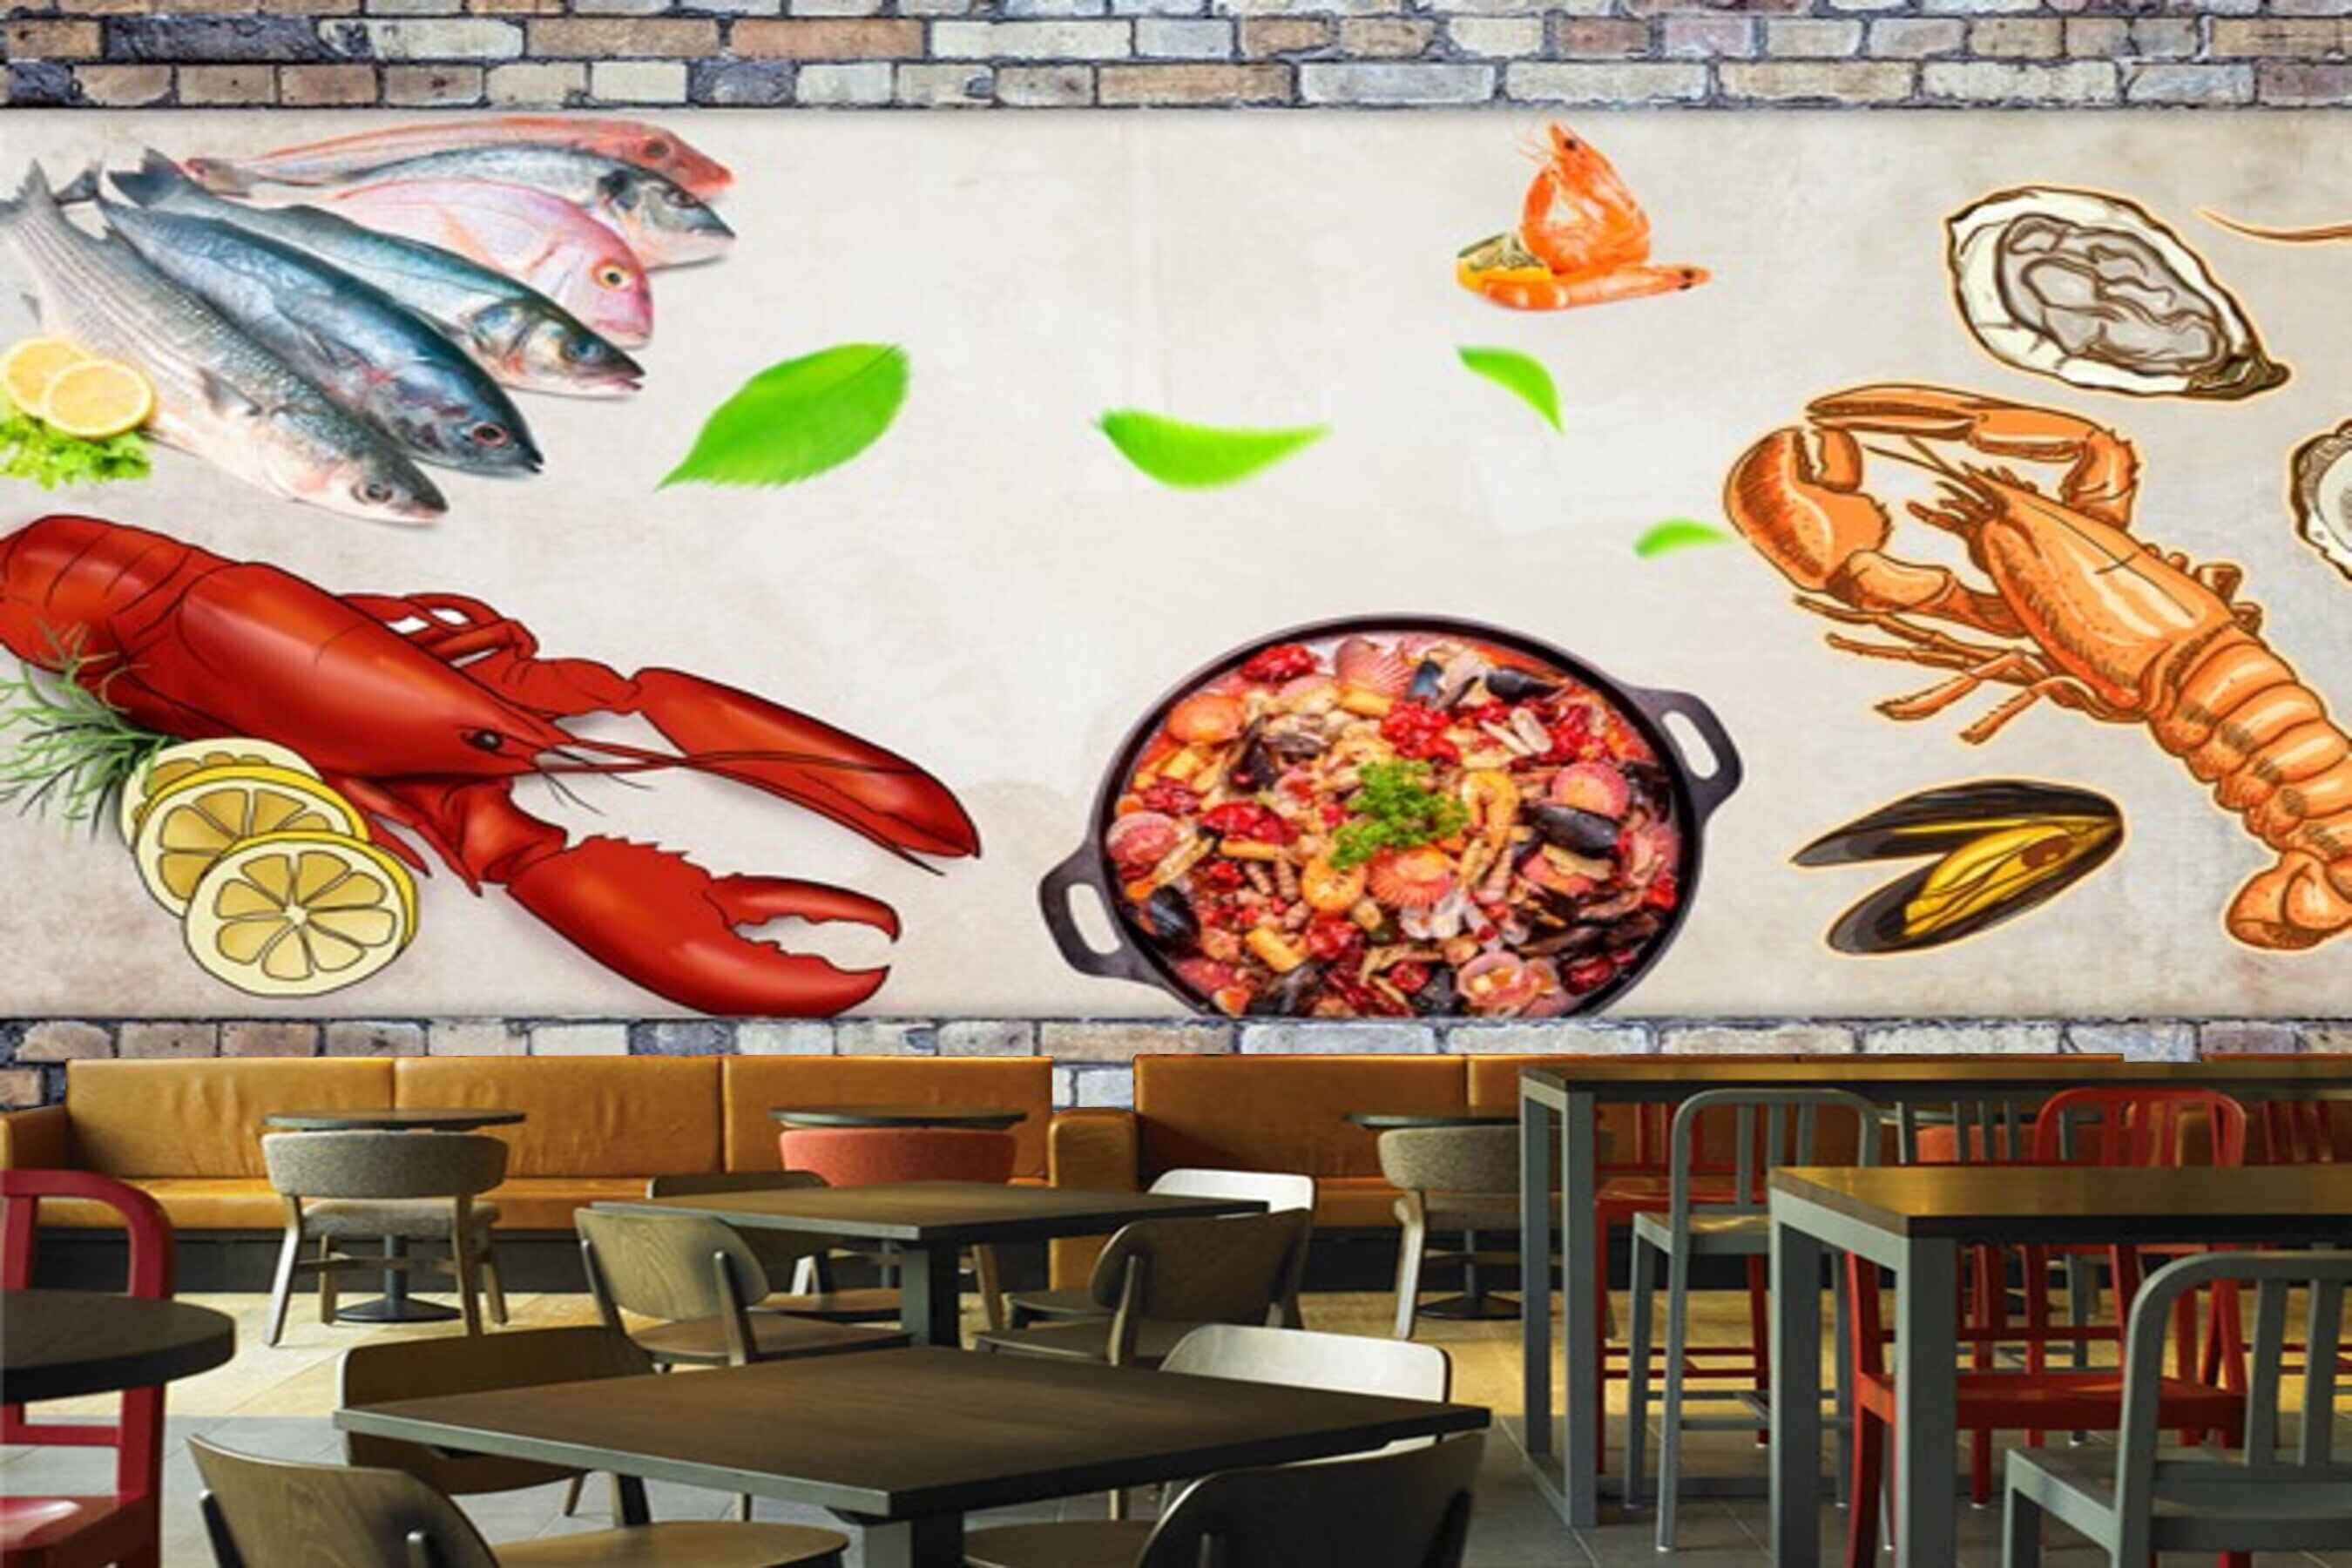 Avikalp MWZ3024 Crabs Fishes Food Scorpios HD Wallpaper for Cafe Restaurant